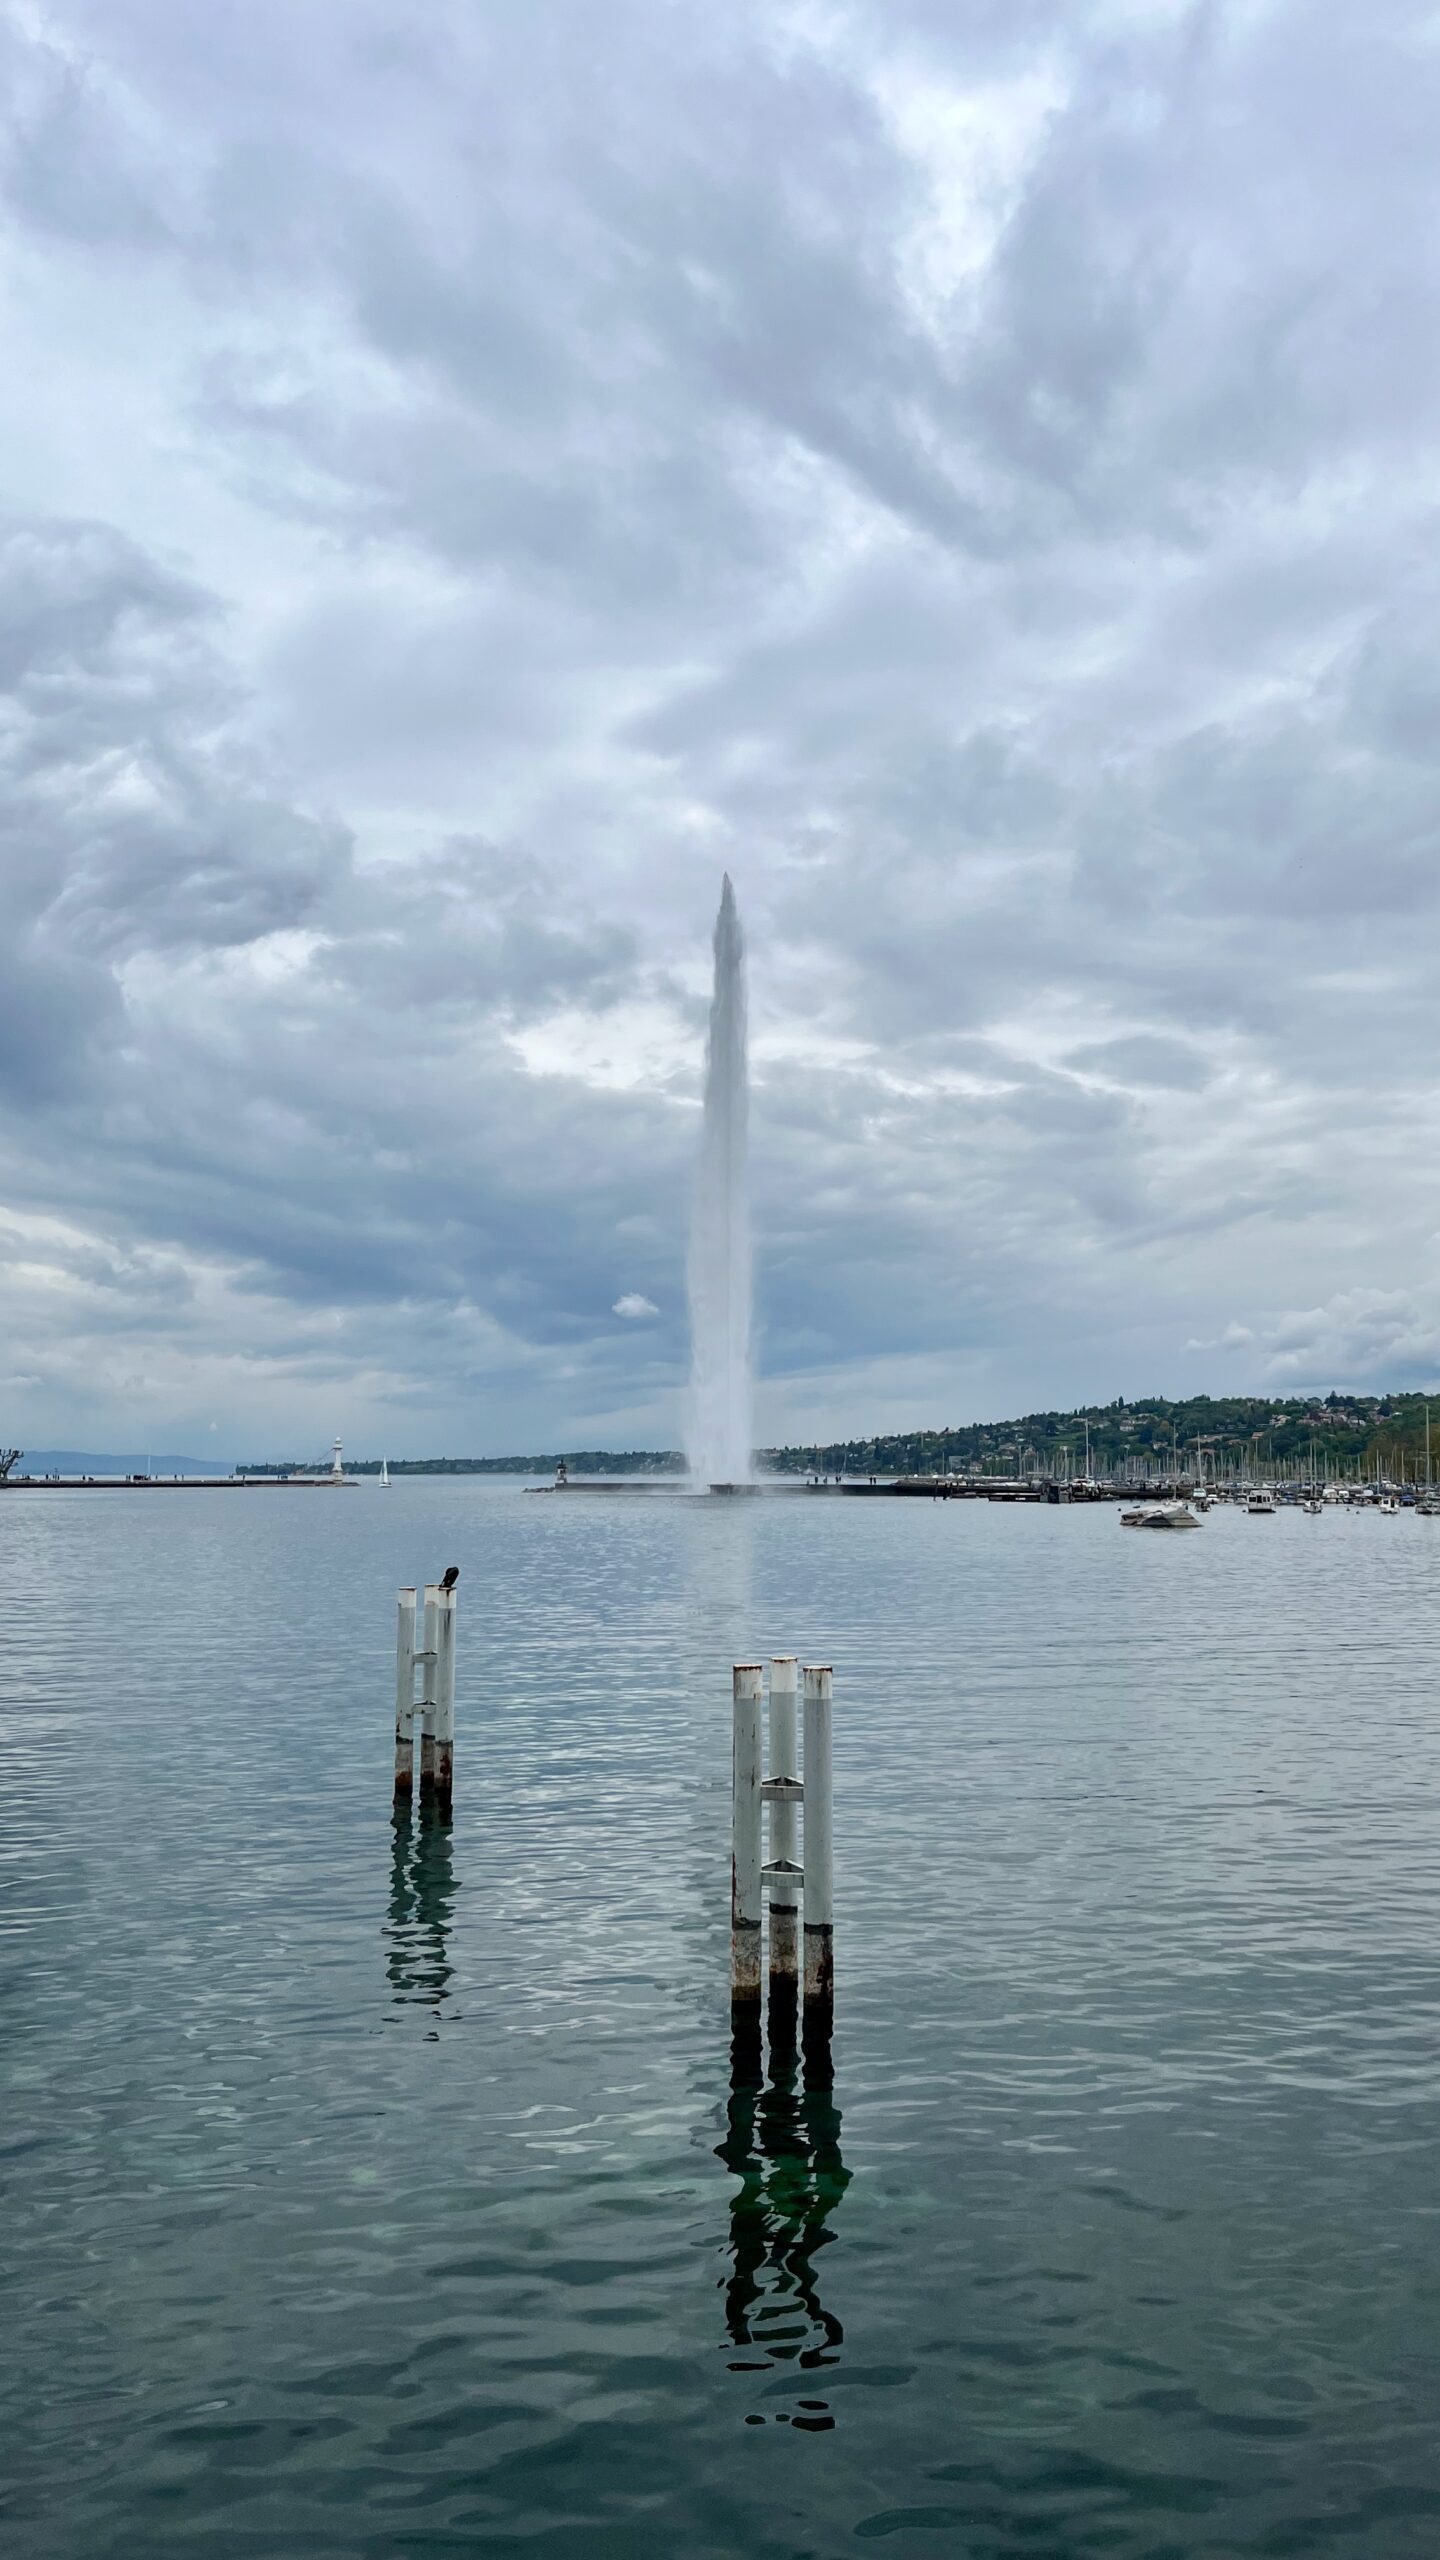 a geyser looking jet shooting up in lake Geneva with blue water all around